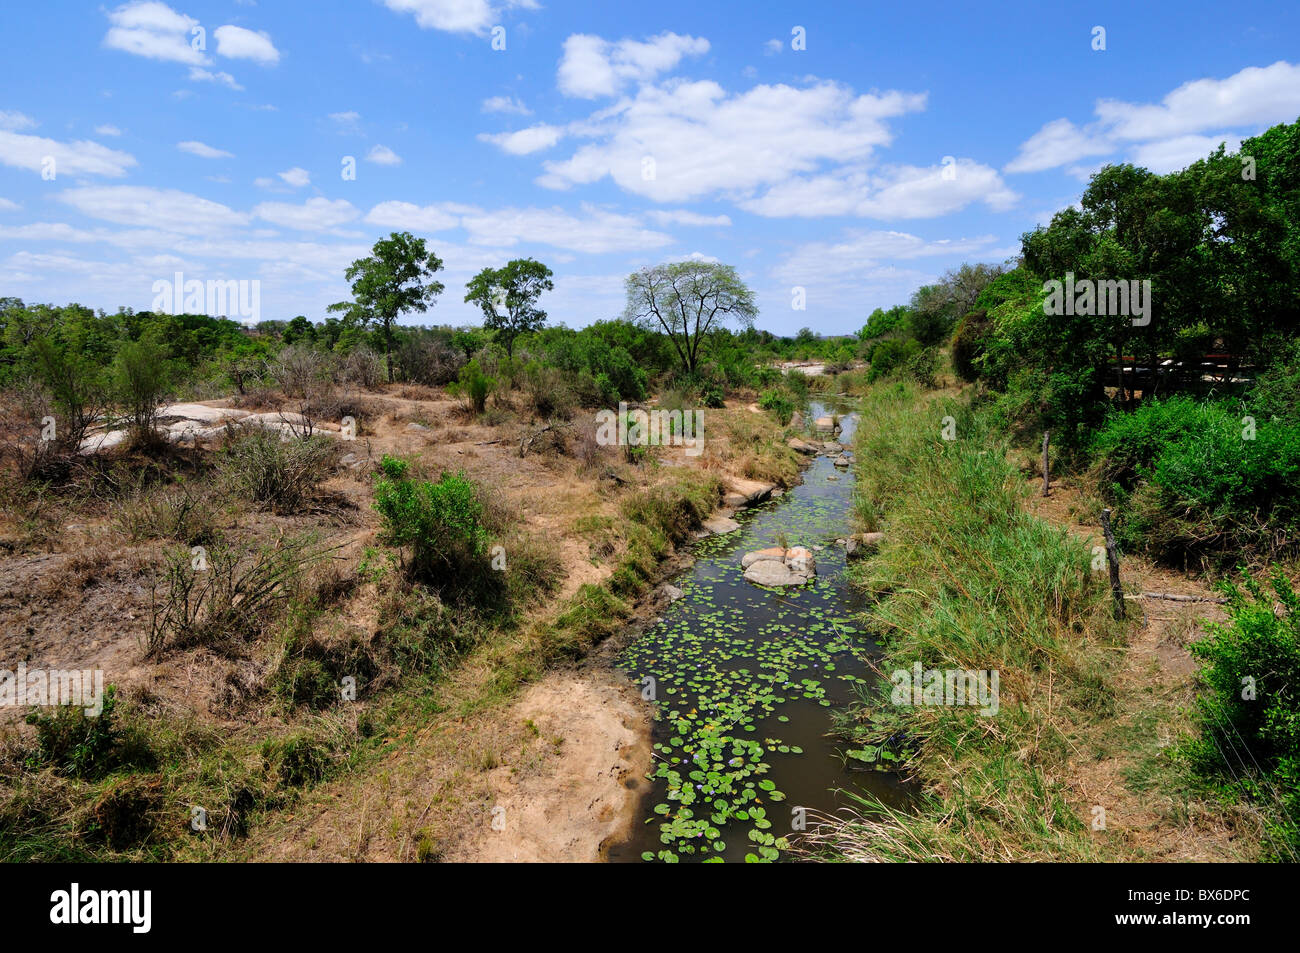 A water hole in Africa plains. Stock Photo